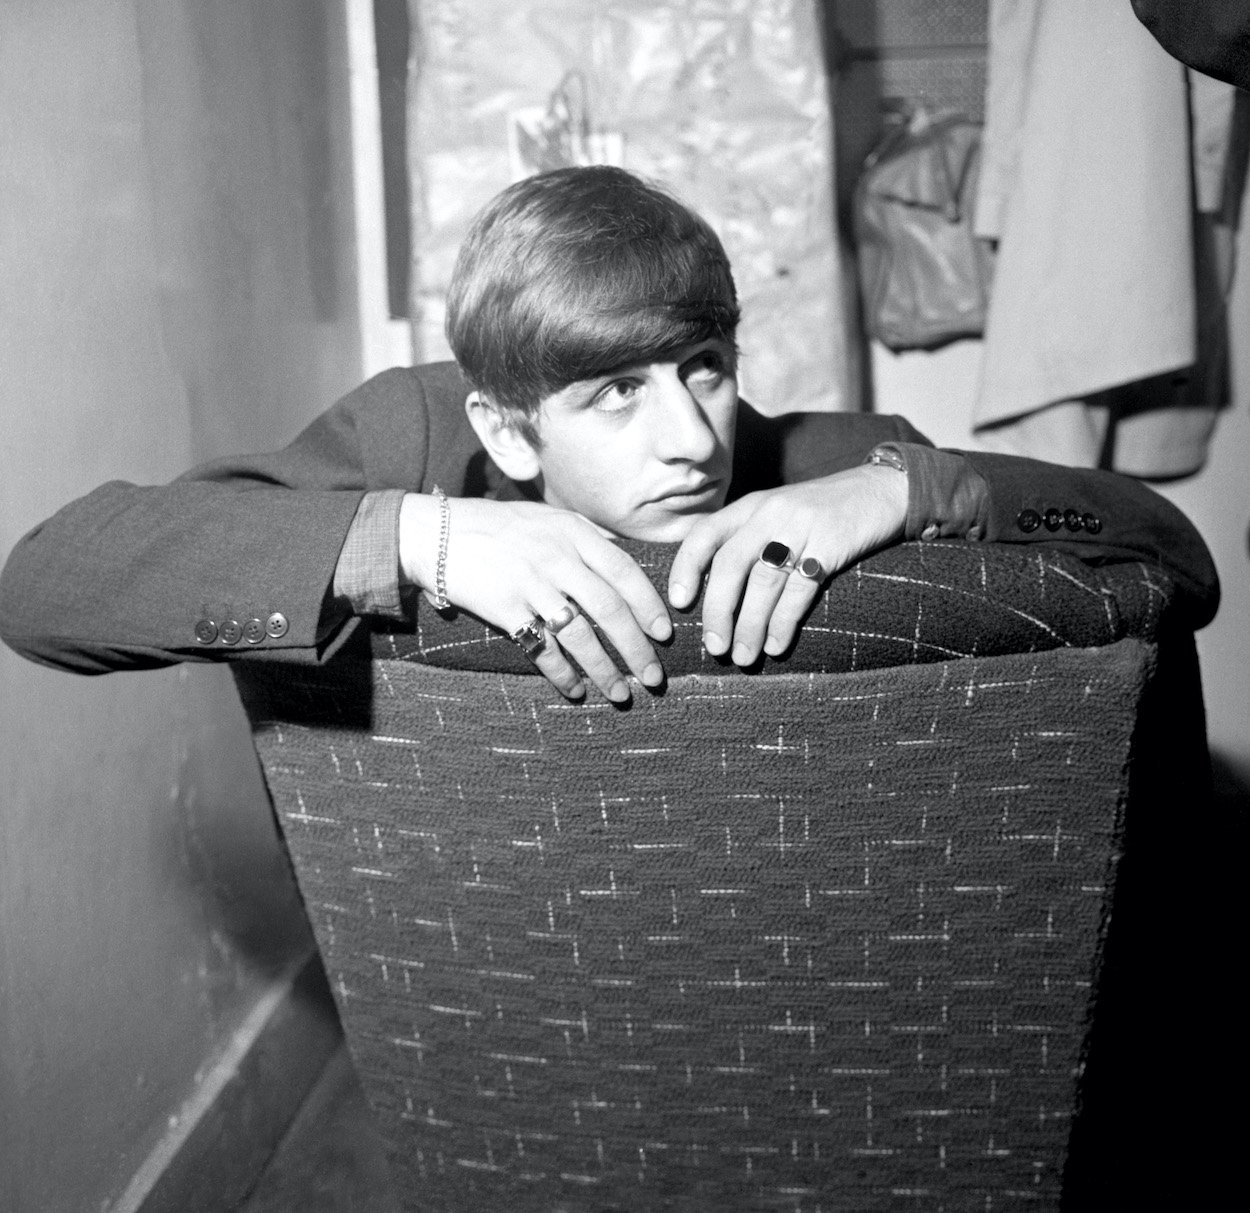 Ringo Starr Had to Beg During His Early Days as a Drummer, but He Made Sure Other Drummers Didn't Have To